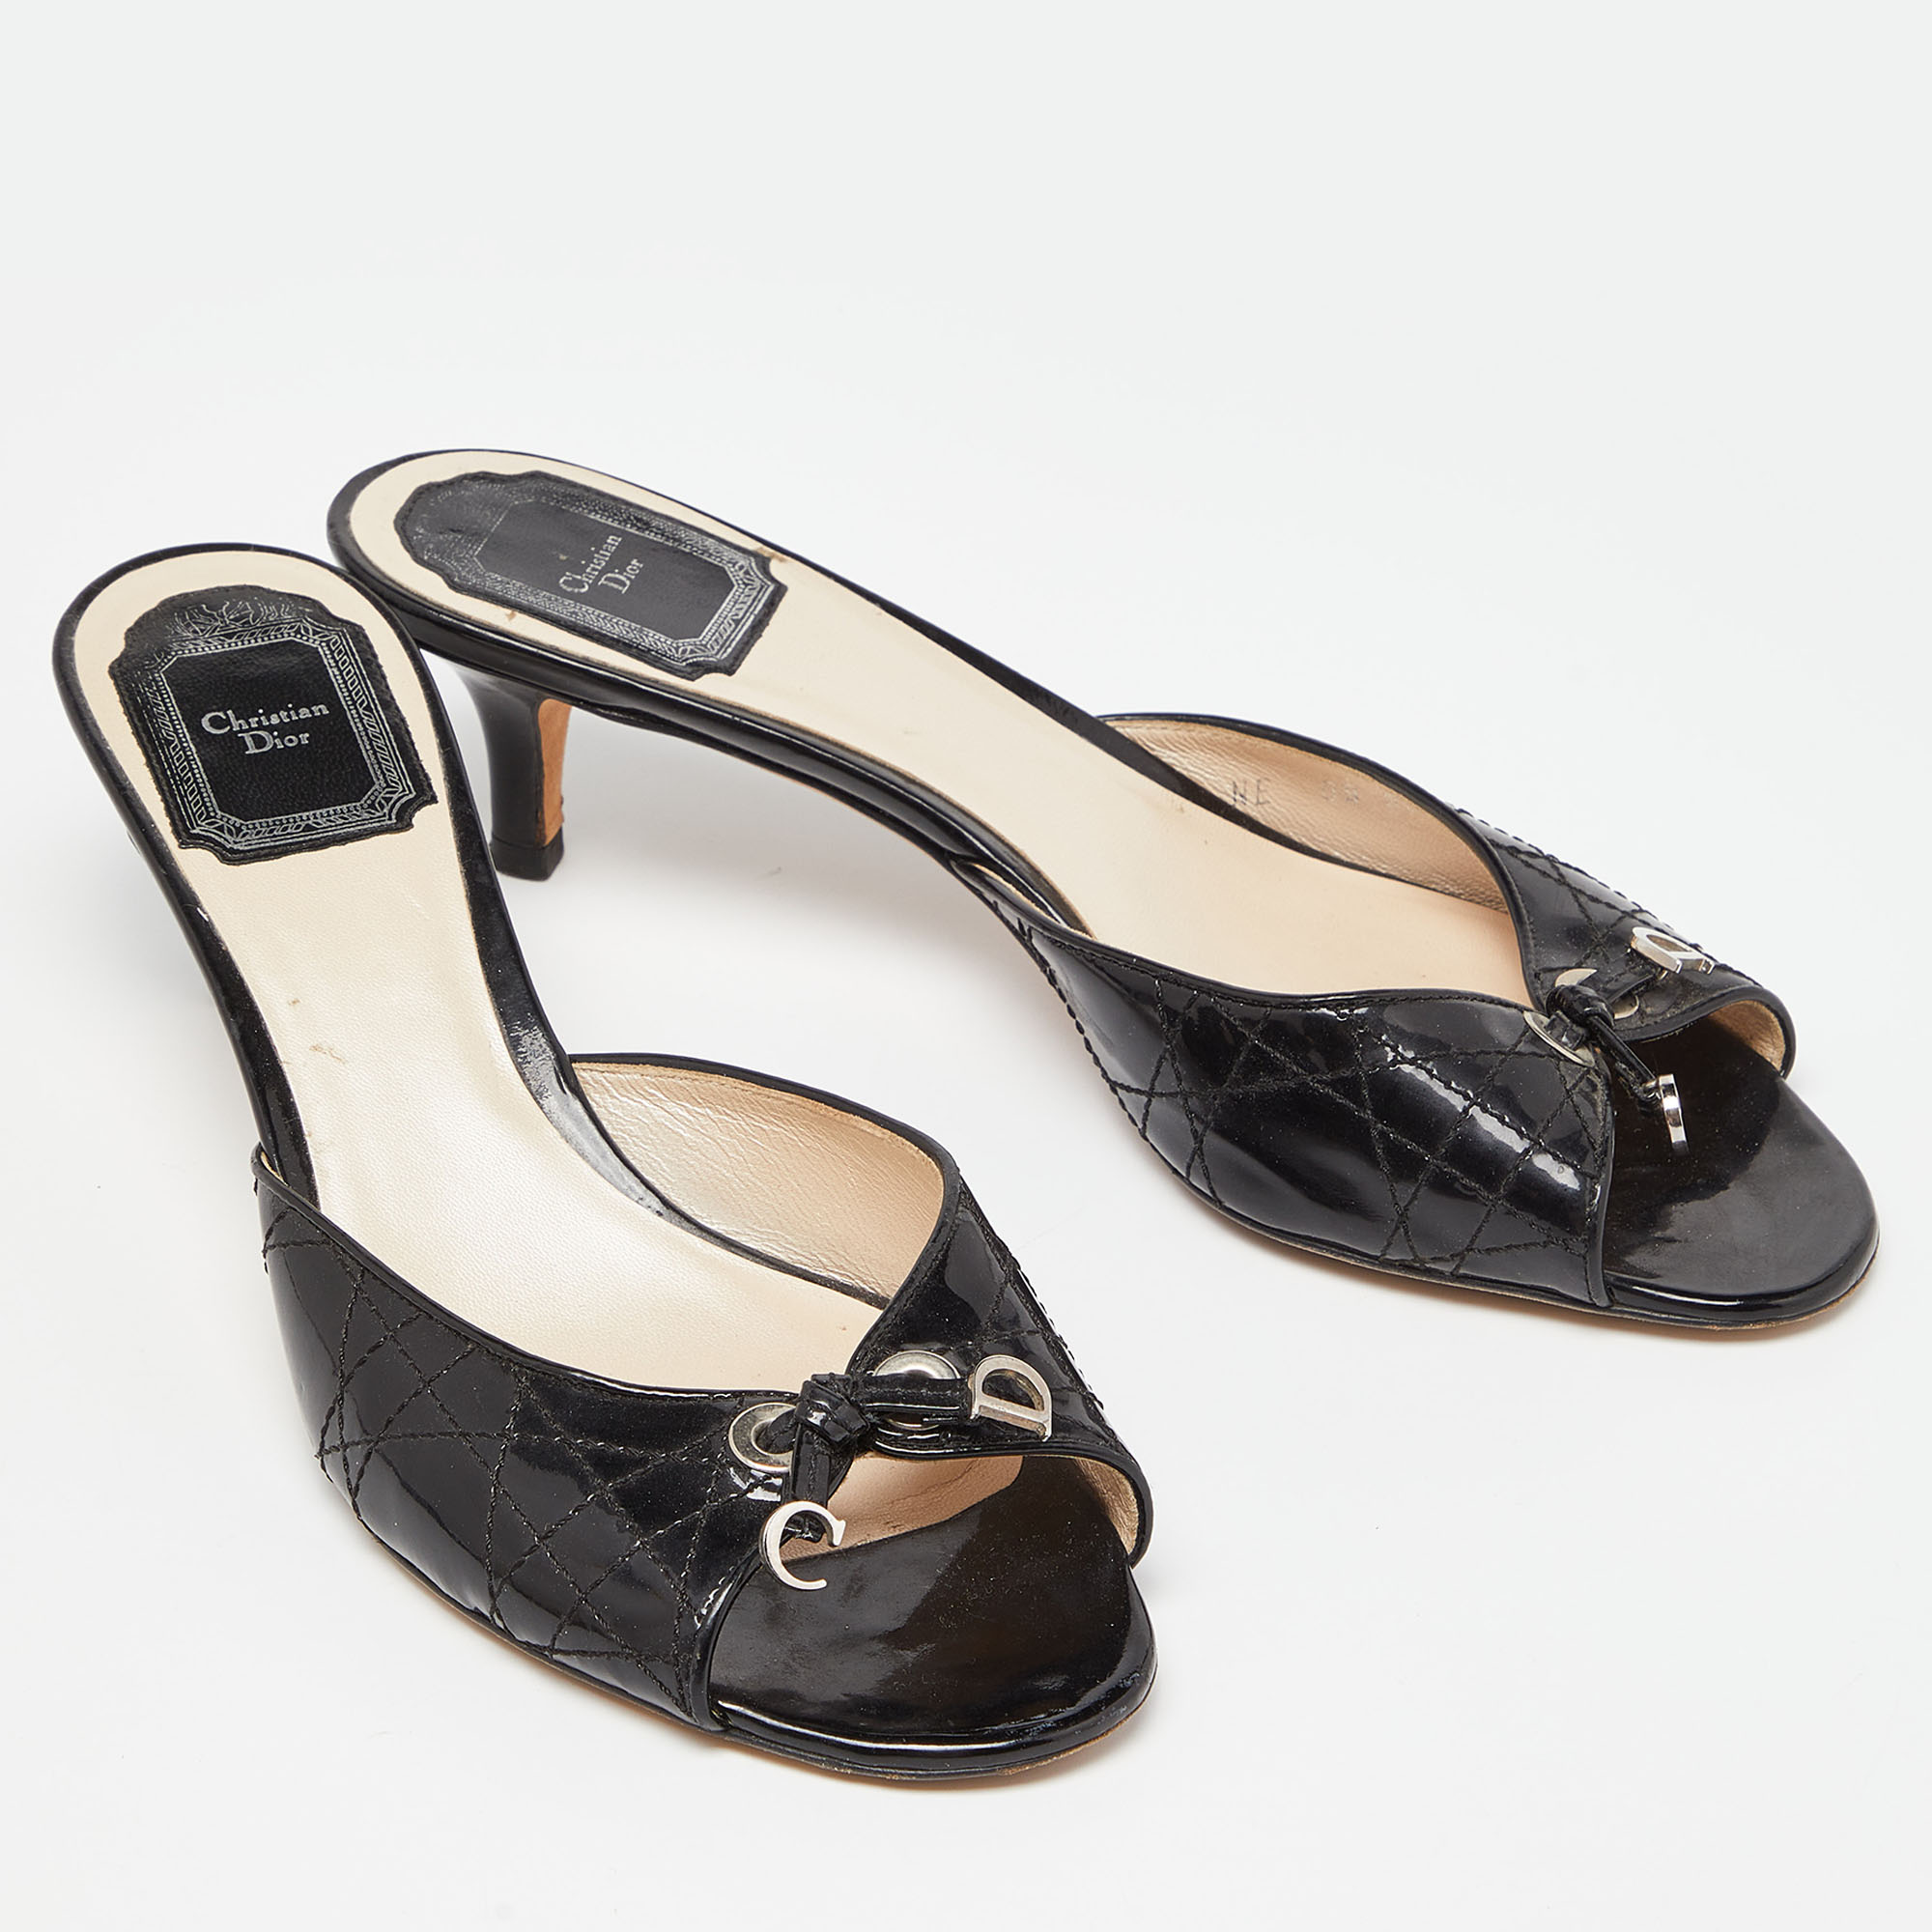 Dior Black Cannage Patent Leather Buckle Open Toe Sandals Size 38.5